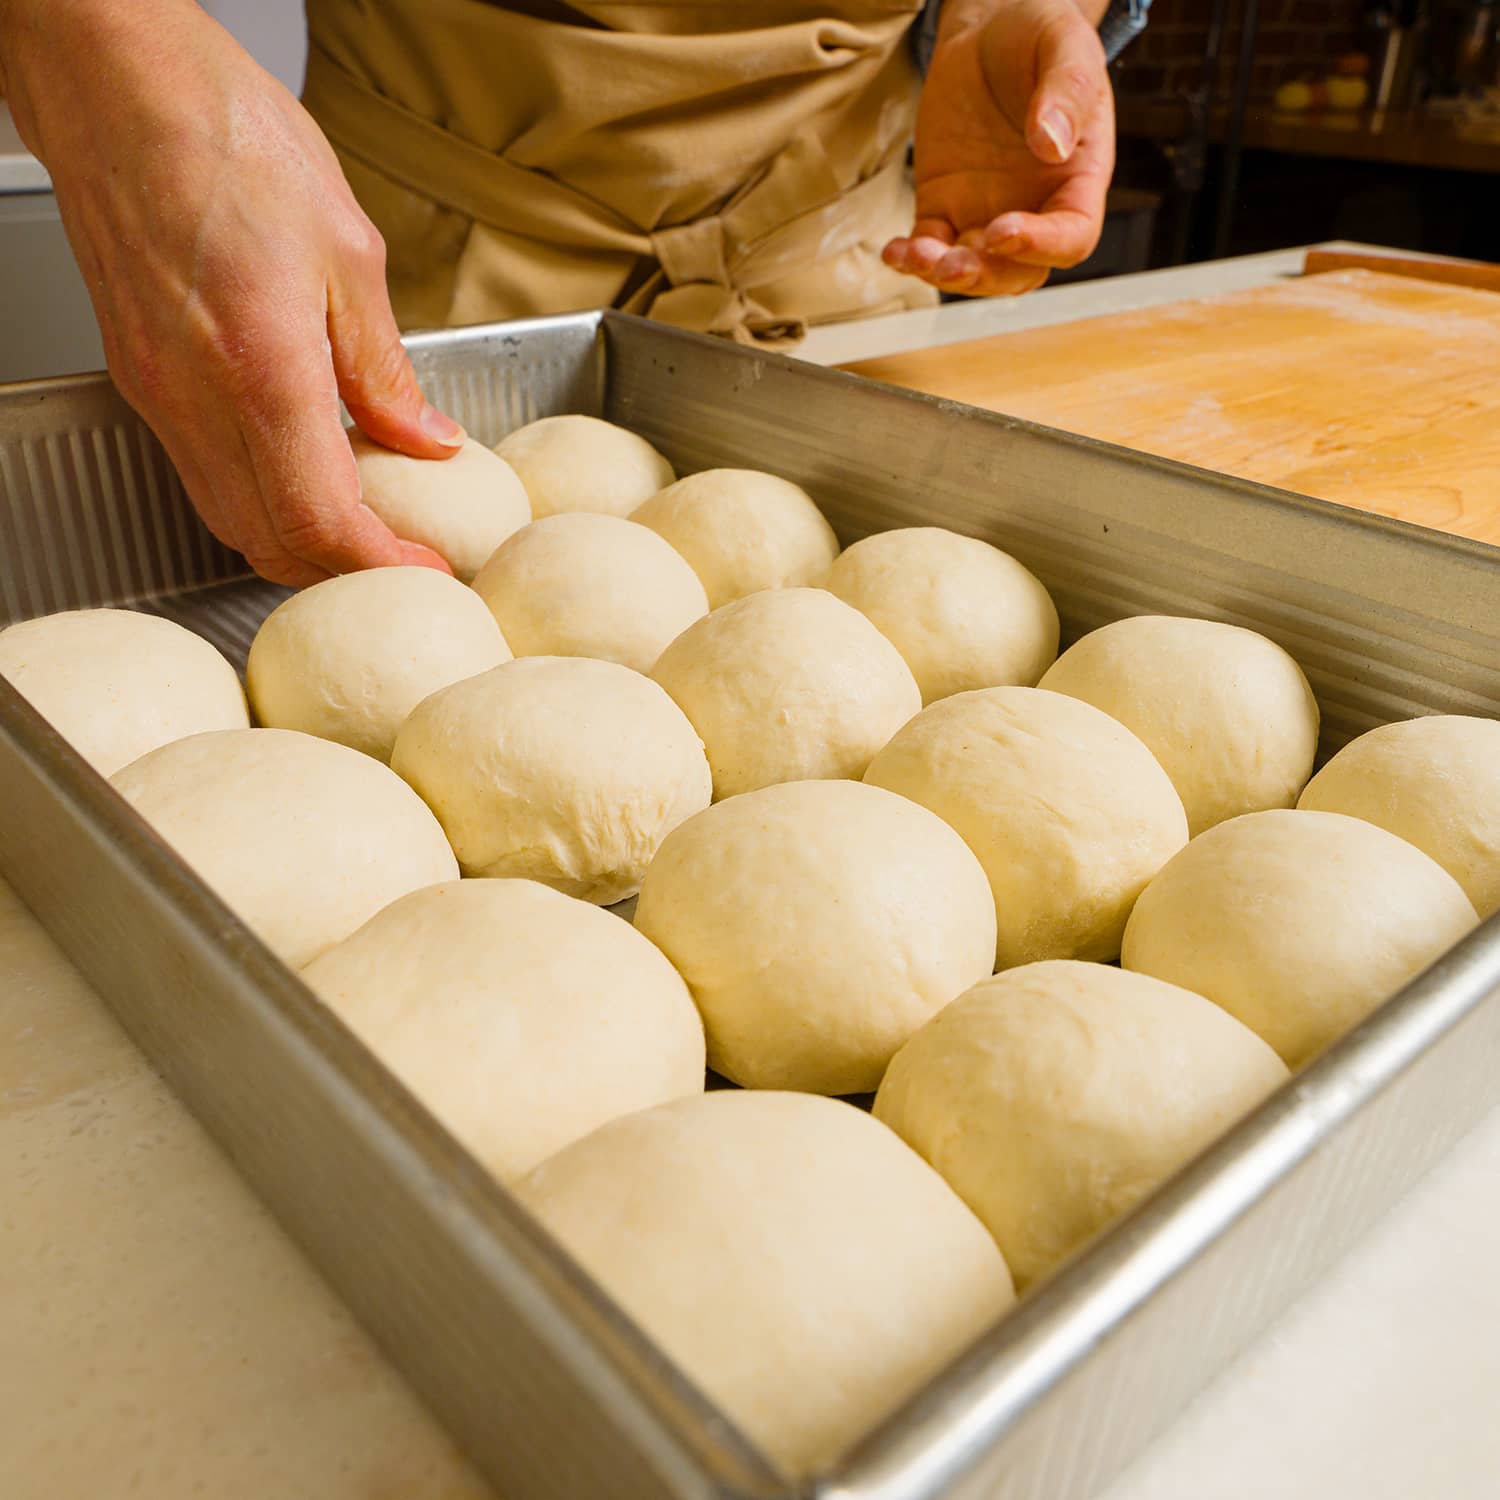 Placing the rolls in a pan